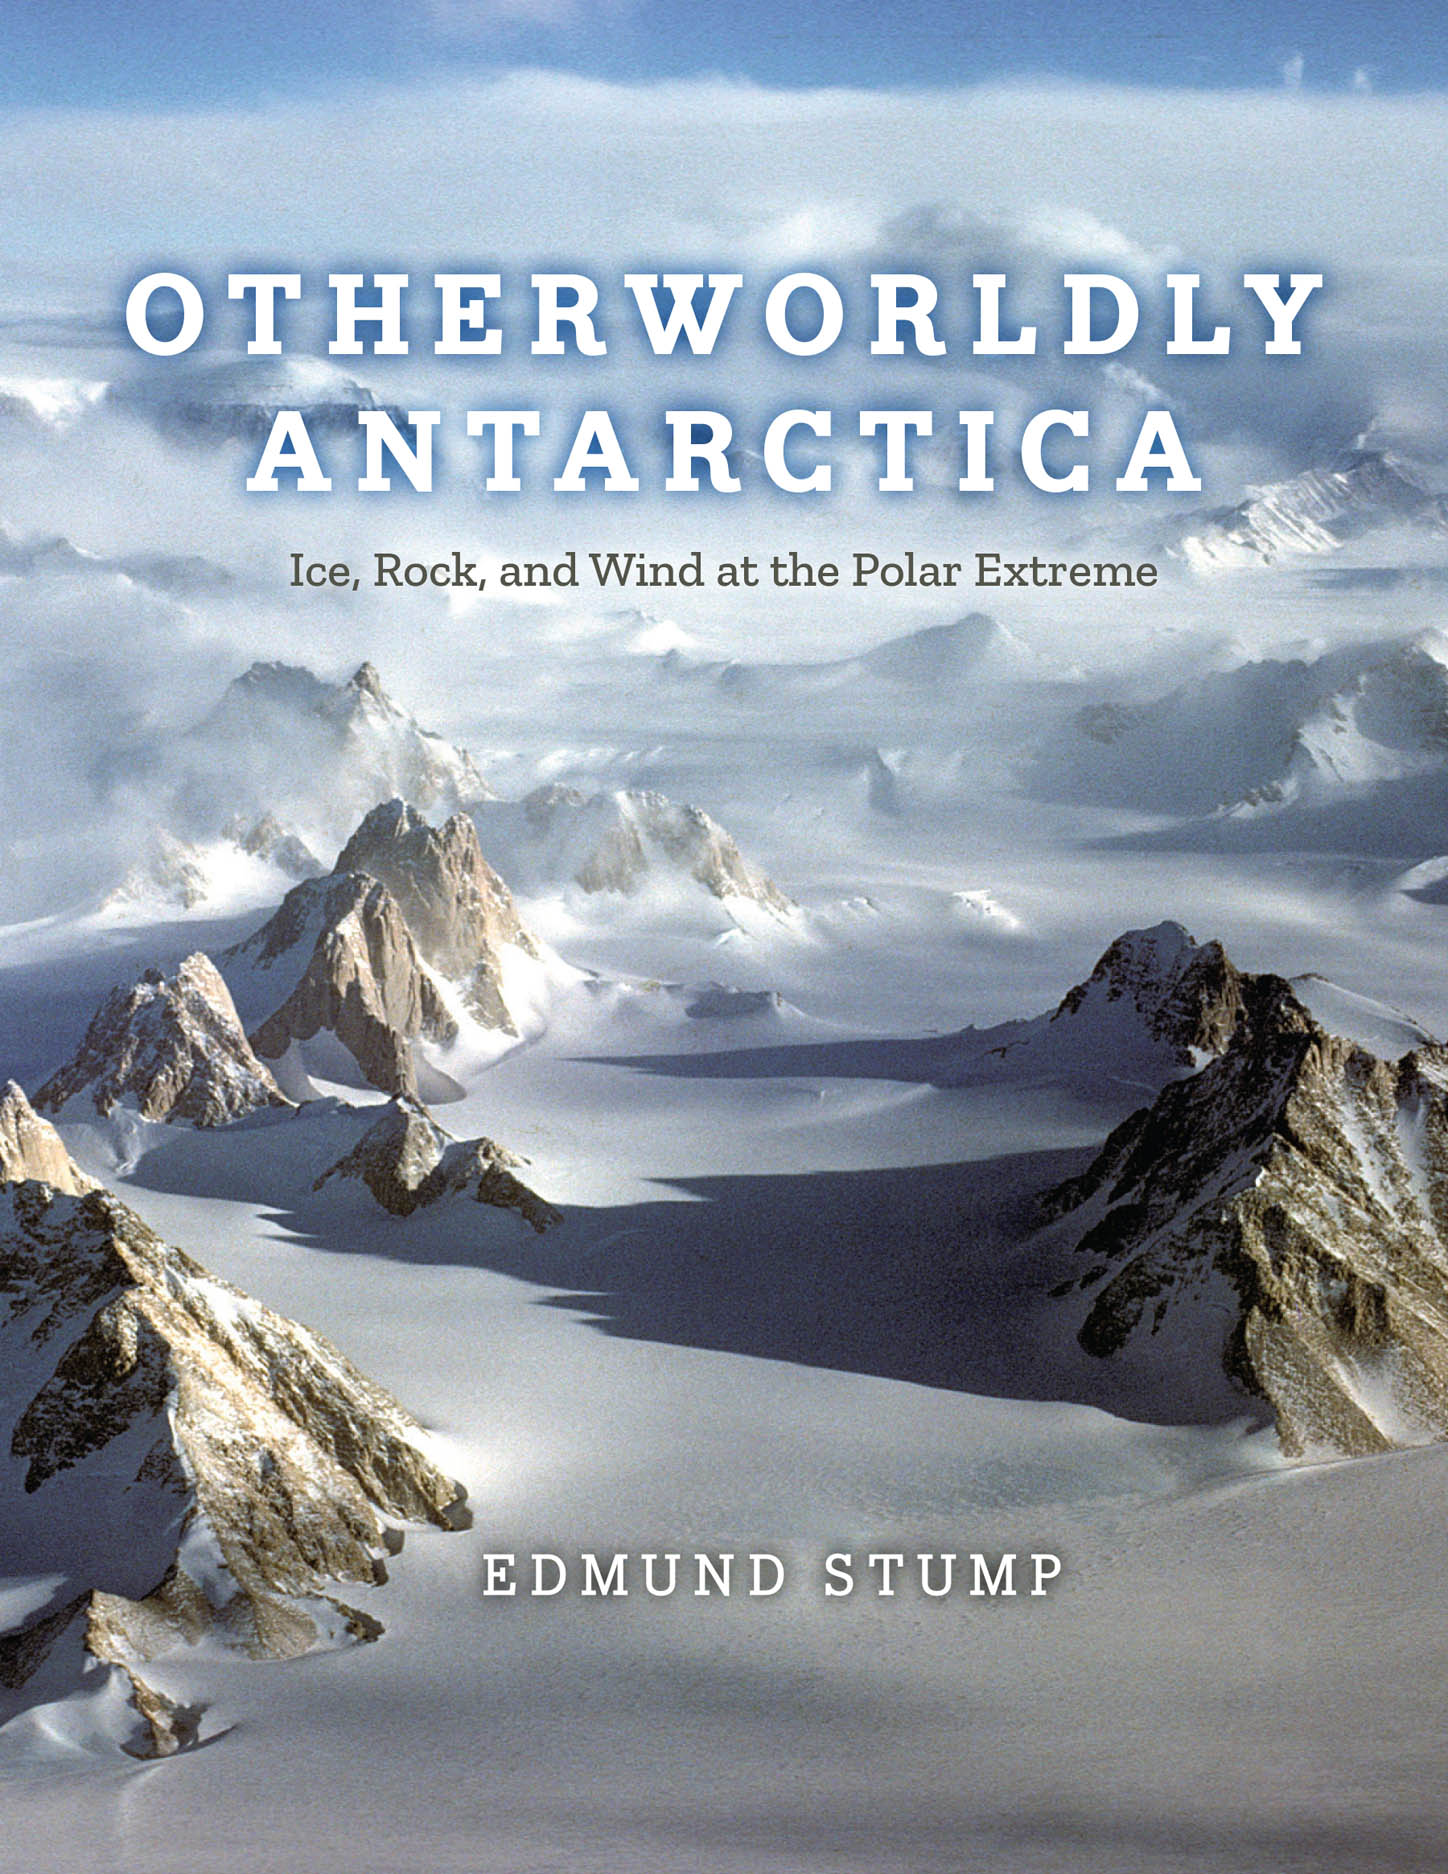 Otherworldly Antarctica: Ice, Rock, and Wind at the Polar Extreme, Stump